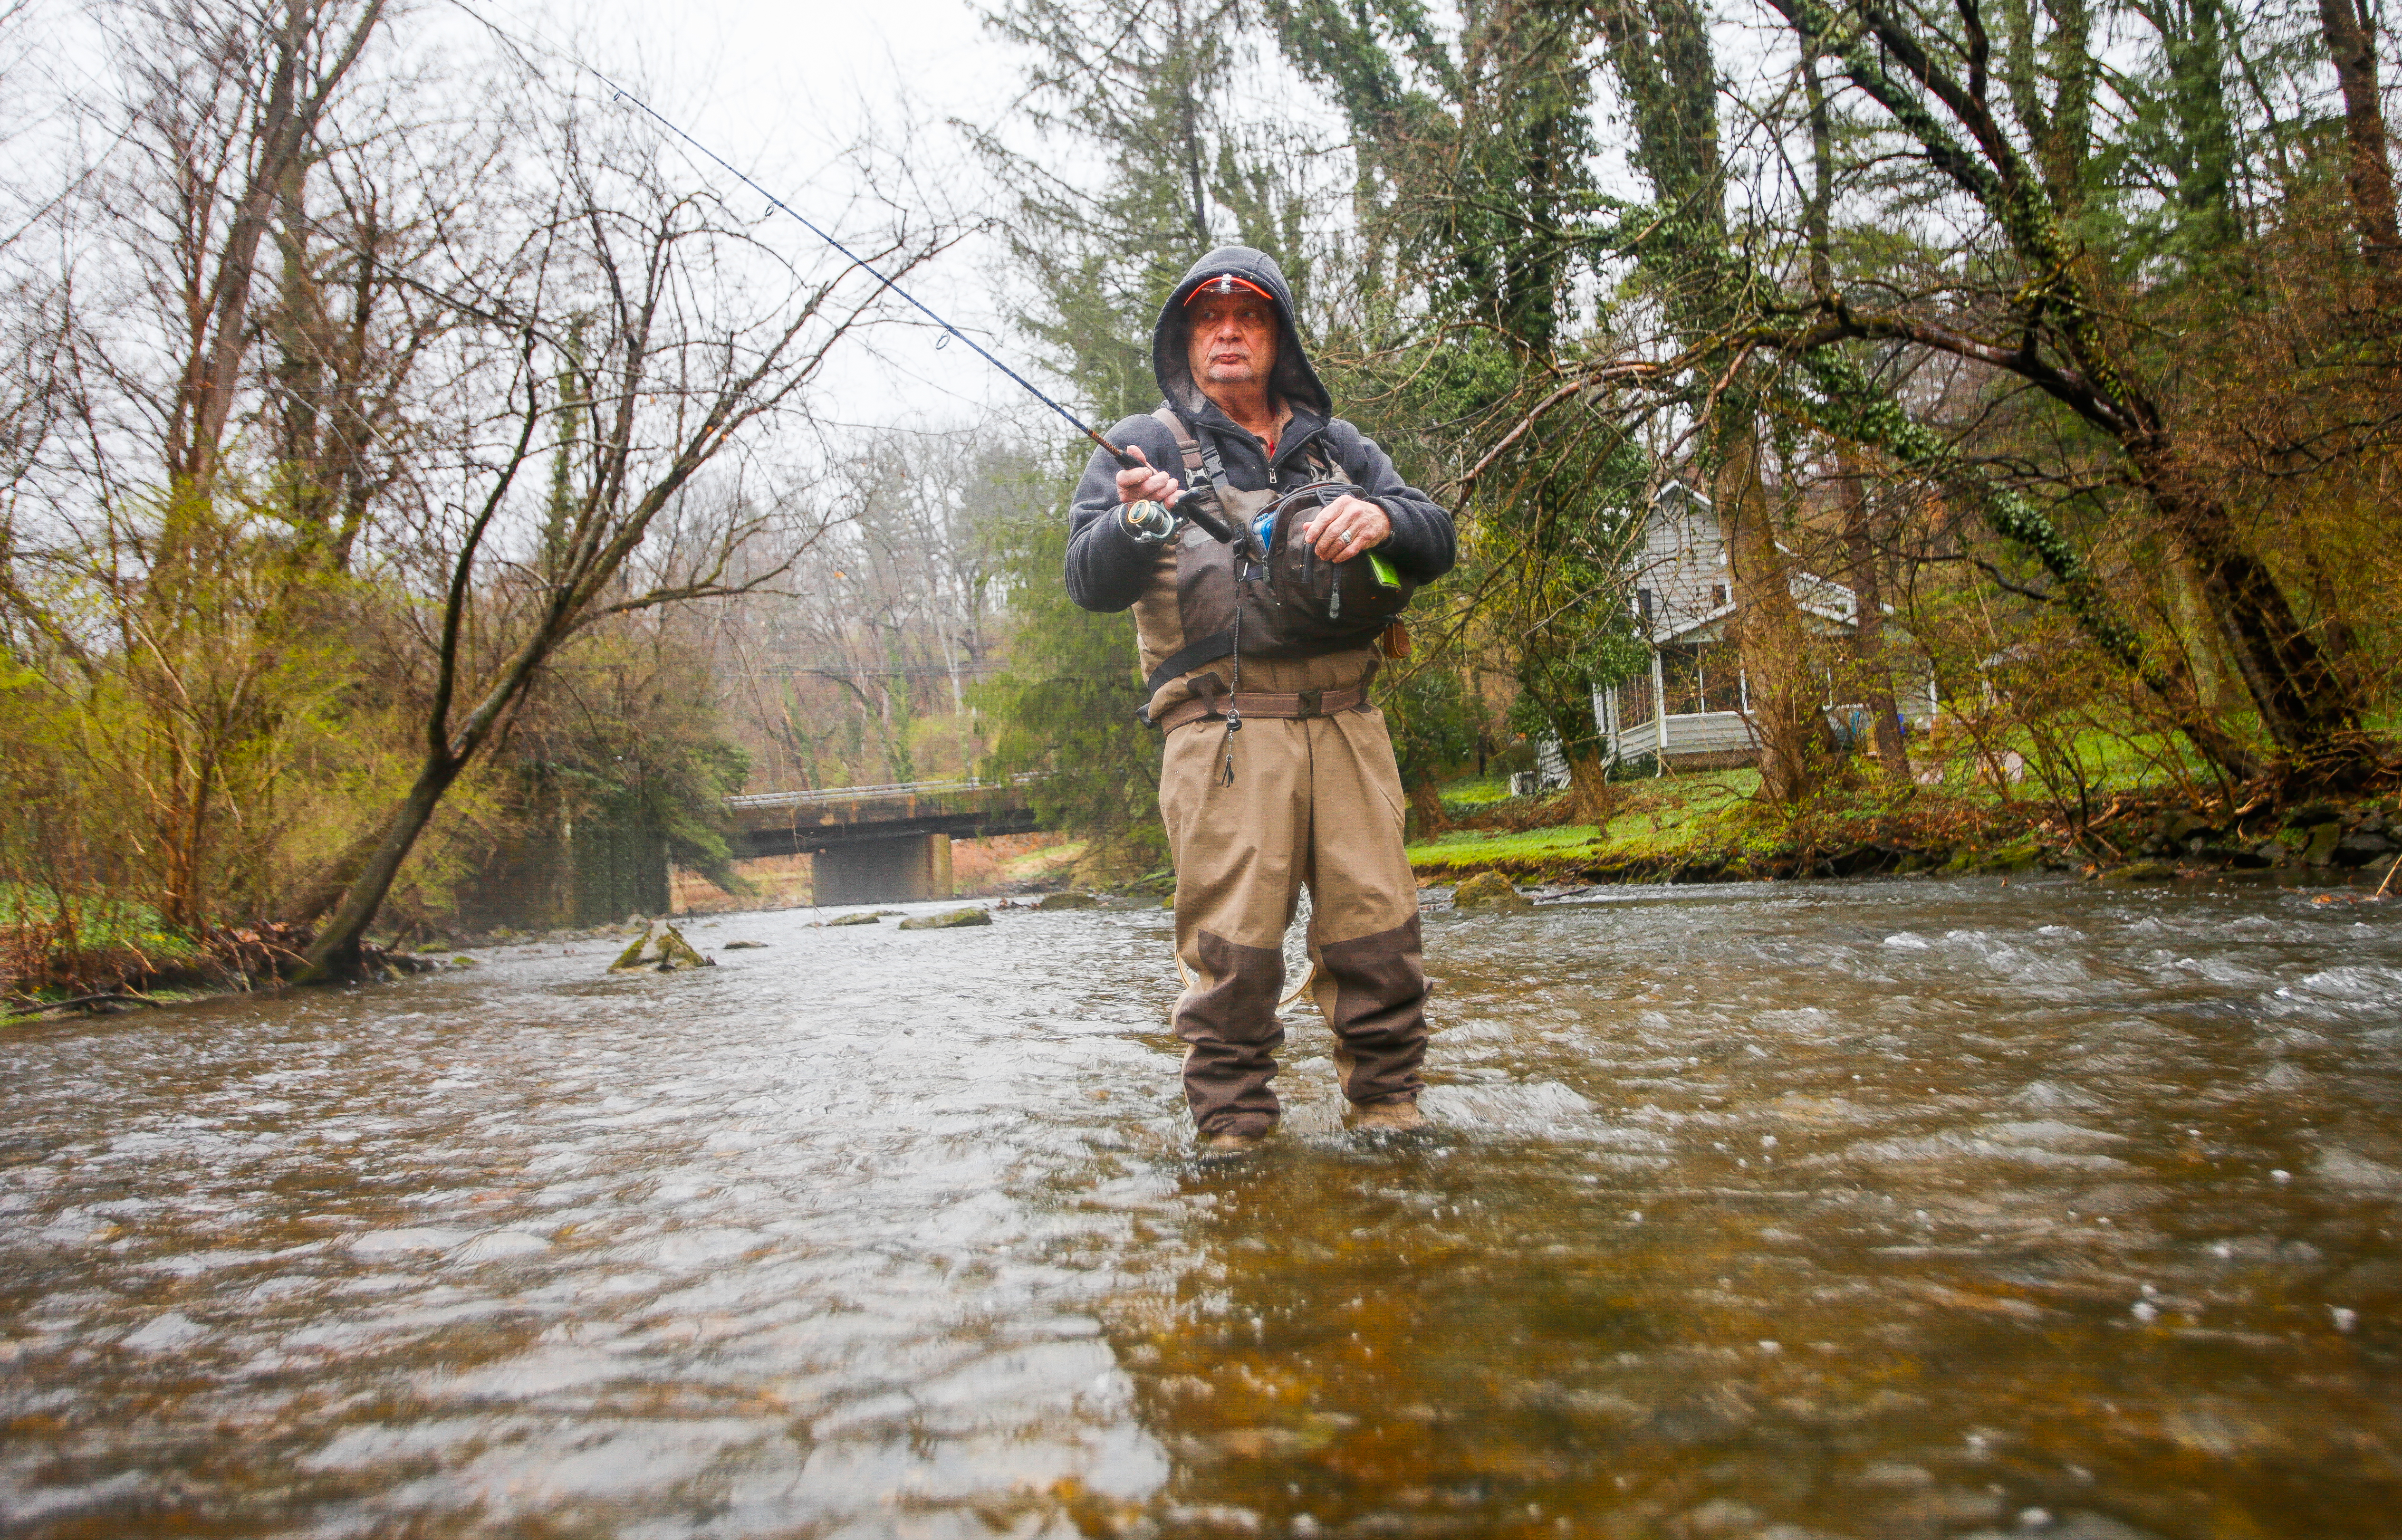 How to Catch More Fish: Trout Fishing in Pennsylvania - Harvesting